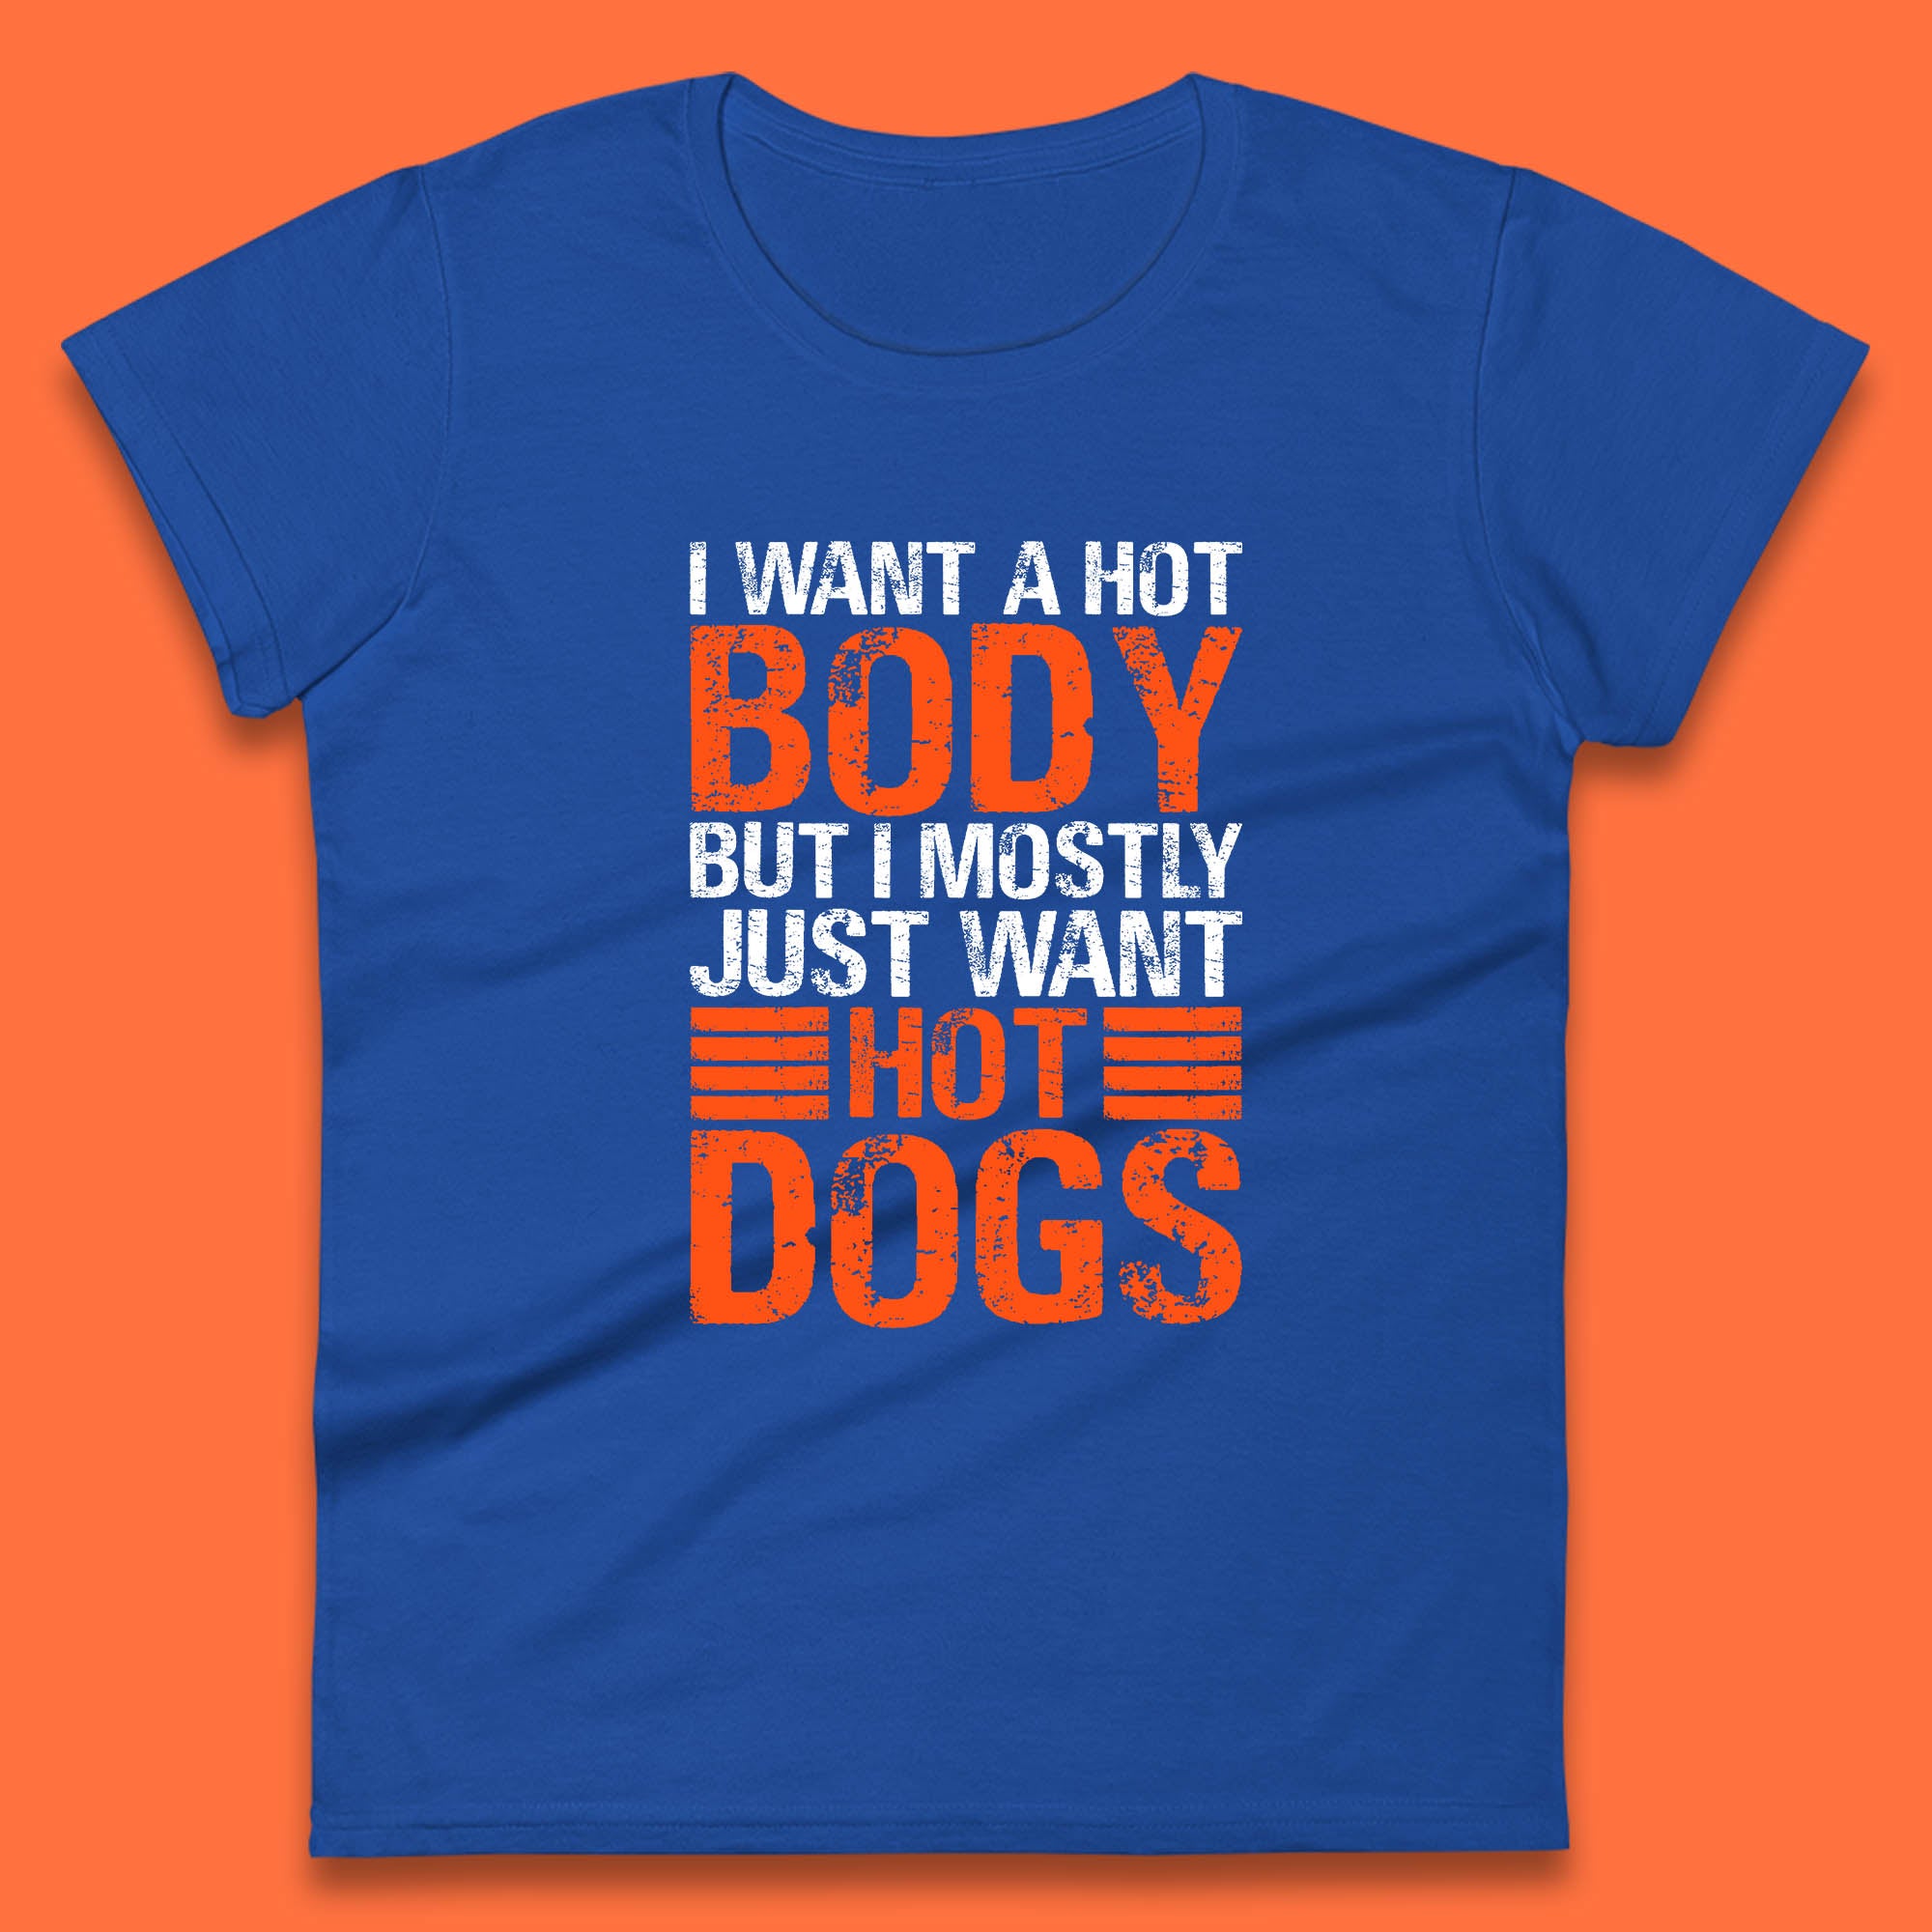 I Want A Hot Body But I Mostly Just Want Hot Dogs Funny Gym Workout Humor Hot Dog Lover Womens Tee Top